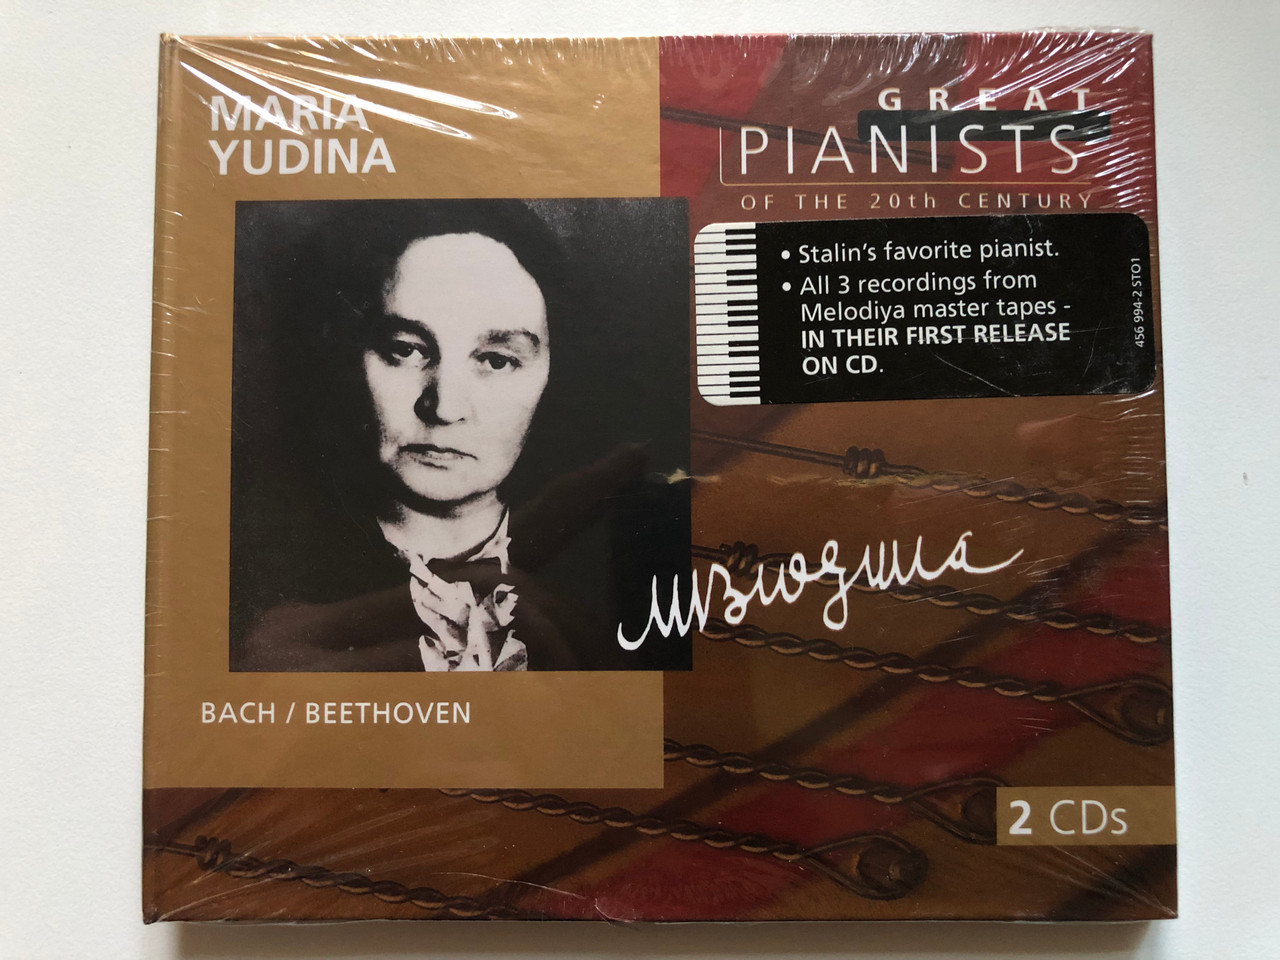 https://cdn10.bigcommerce.com/s-62bdpkt7pb/products/0/images/236322/Maria_Yudina_-_Bach_Beethoven_Great_Pianists_Of_The_20th_Century_-_99_Stalins_favorite_pianist._All_3_recordings_from_Melodiya_master_tapes_-_In_Their_First_Release_On_CD_Philips_2x_Audi_1__91534.1656582004.1280.1280.JPG?c=2&_gl=1*s2j5vy*_ga*MjA2NTIxMjE2MC4xNTkwNTEyNTMy*_ga_WS2VZYPC6G*MTY1NjU4MTczOS40NjAuMC4xNjU2NTgxNzM5LjYw